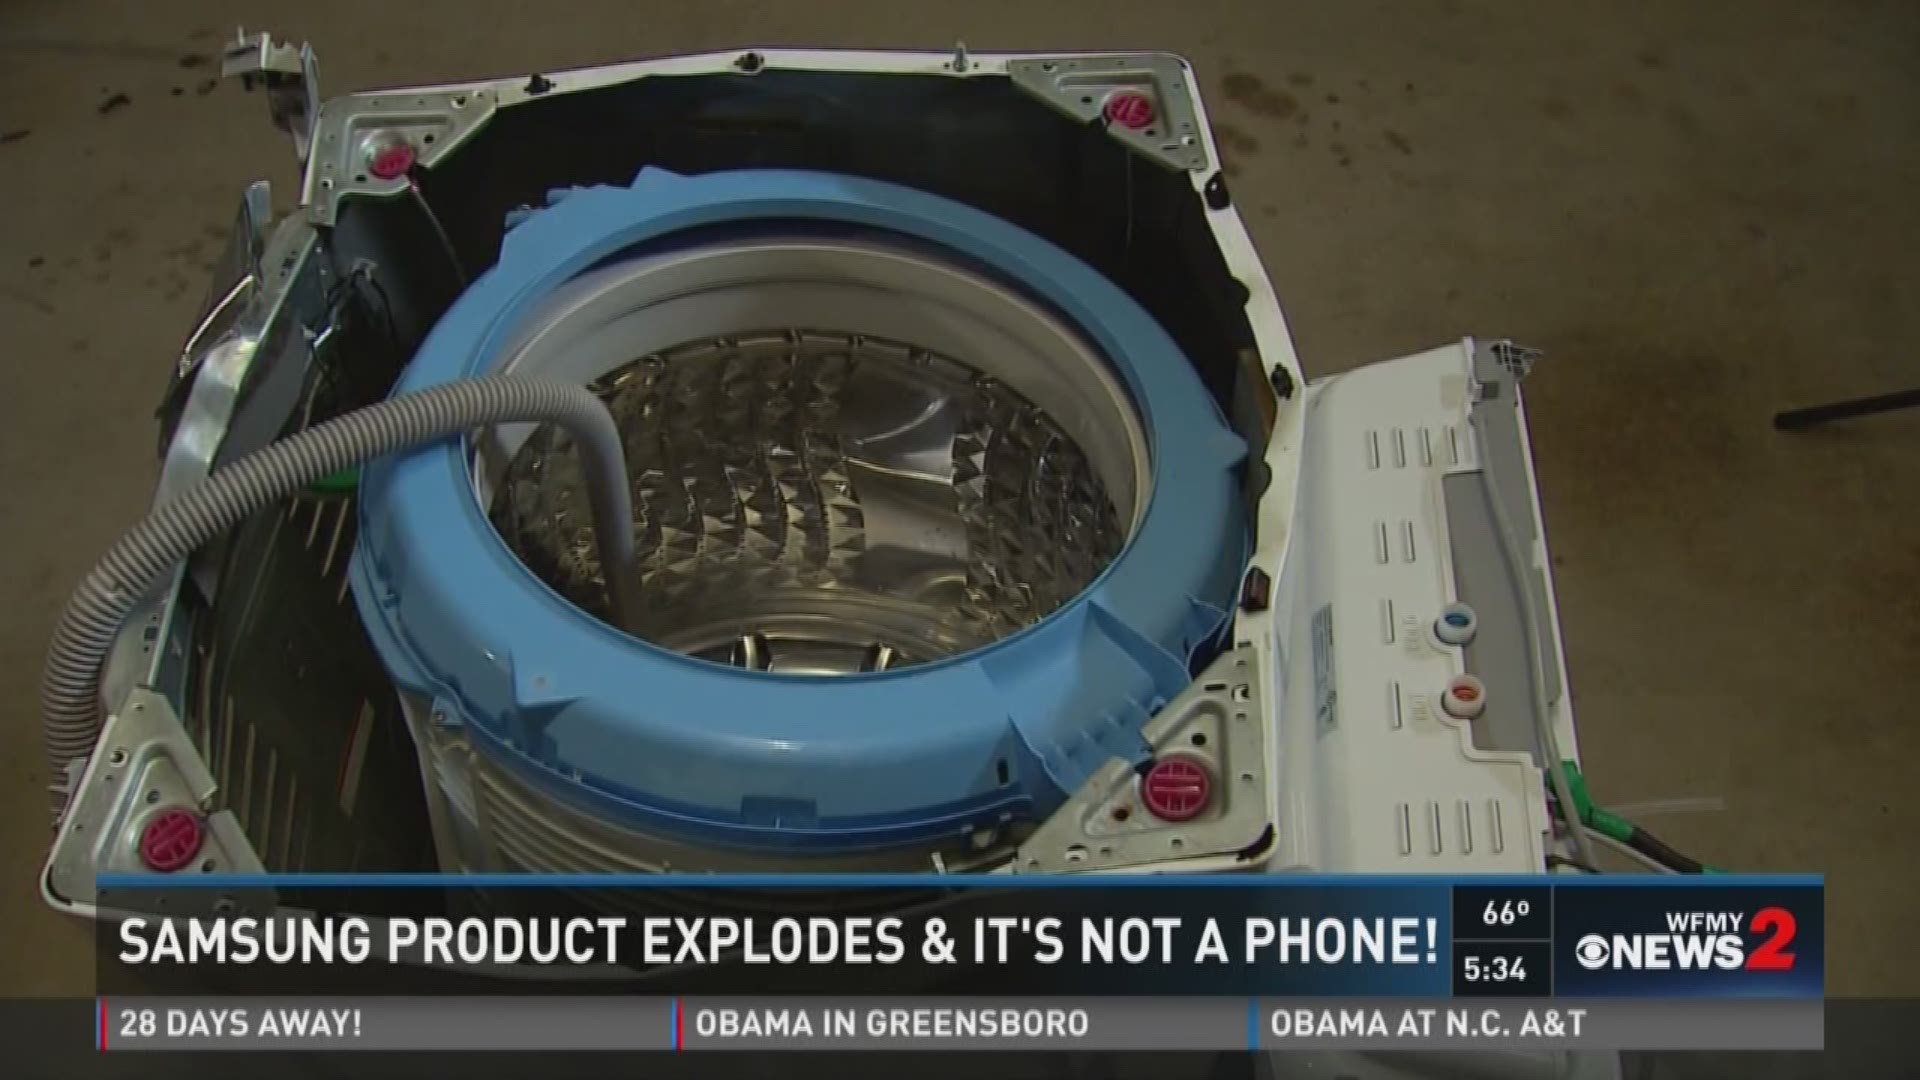 Samsung Product Explodes & It's Not A Phone!